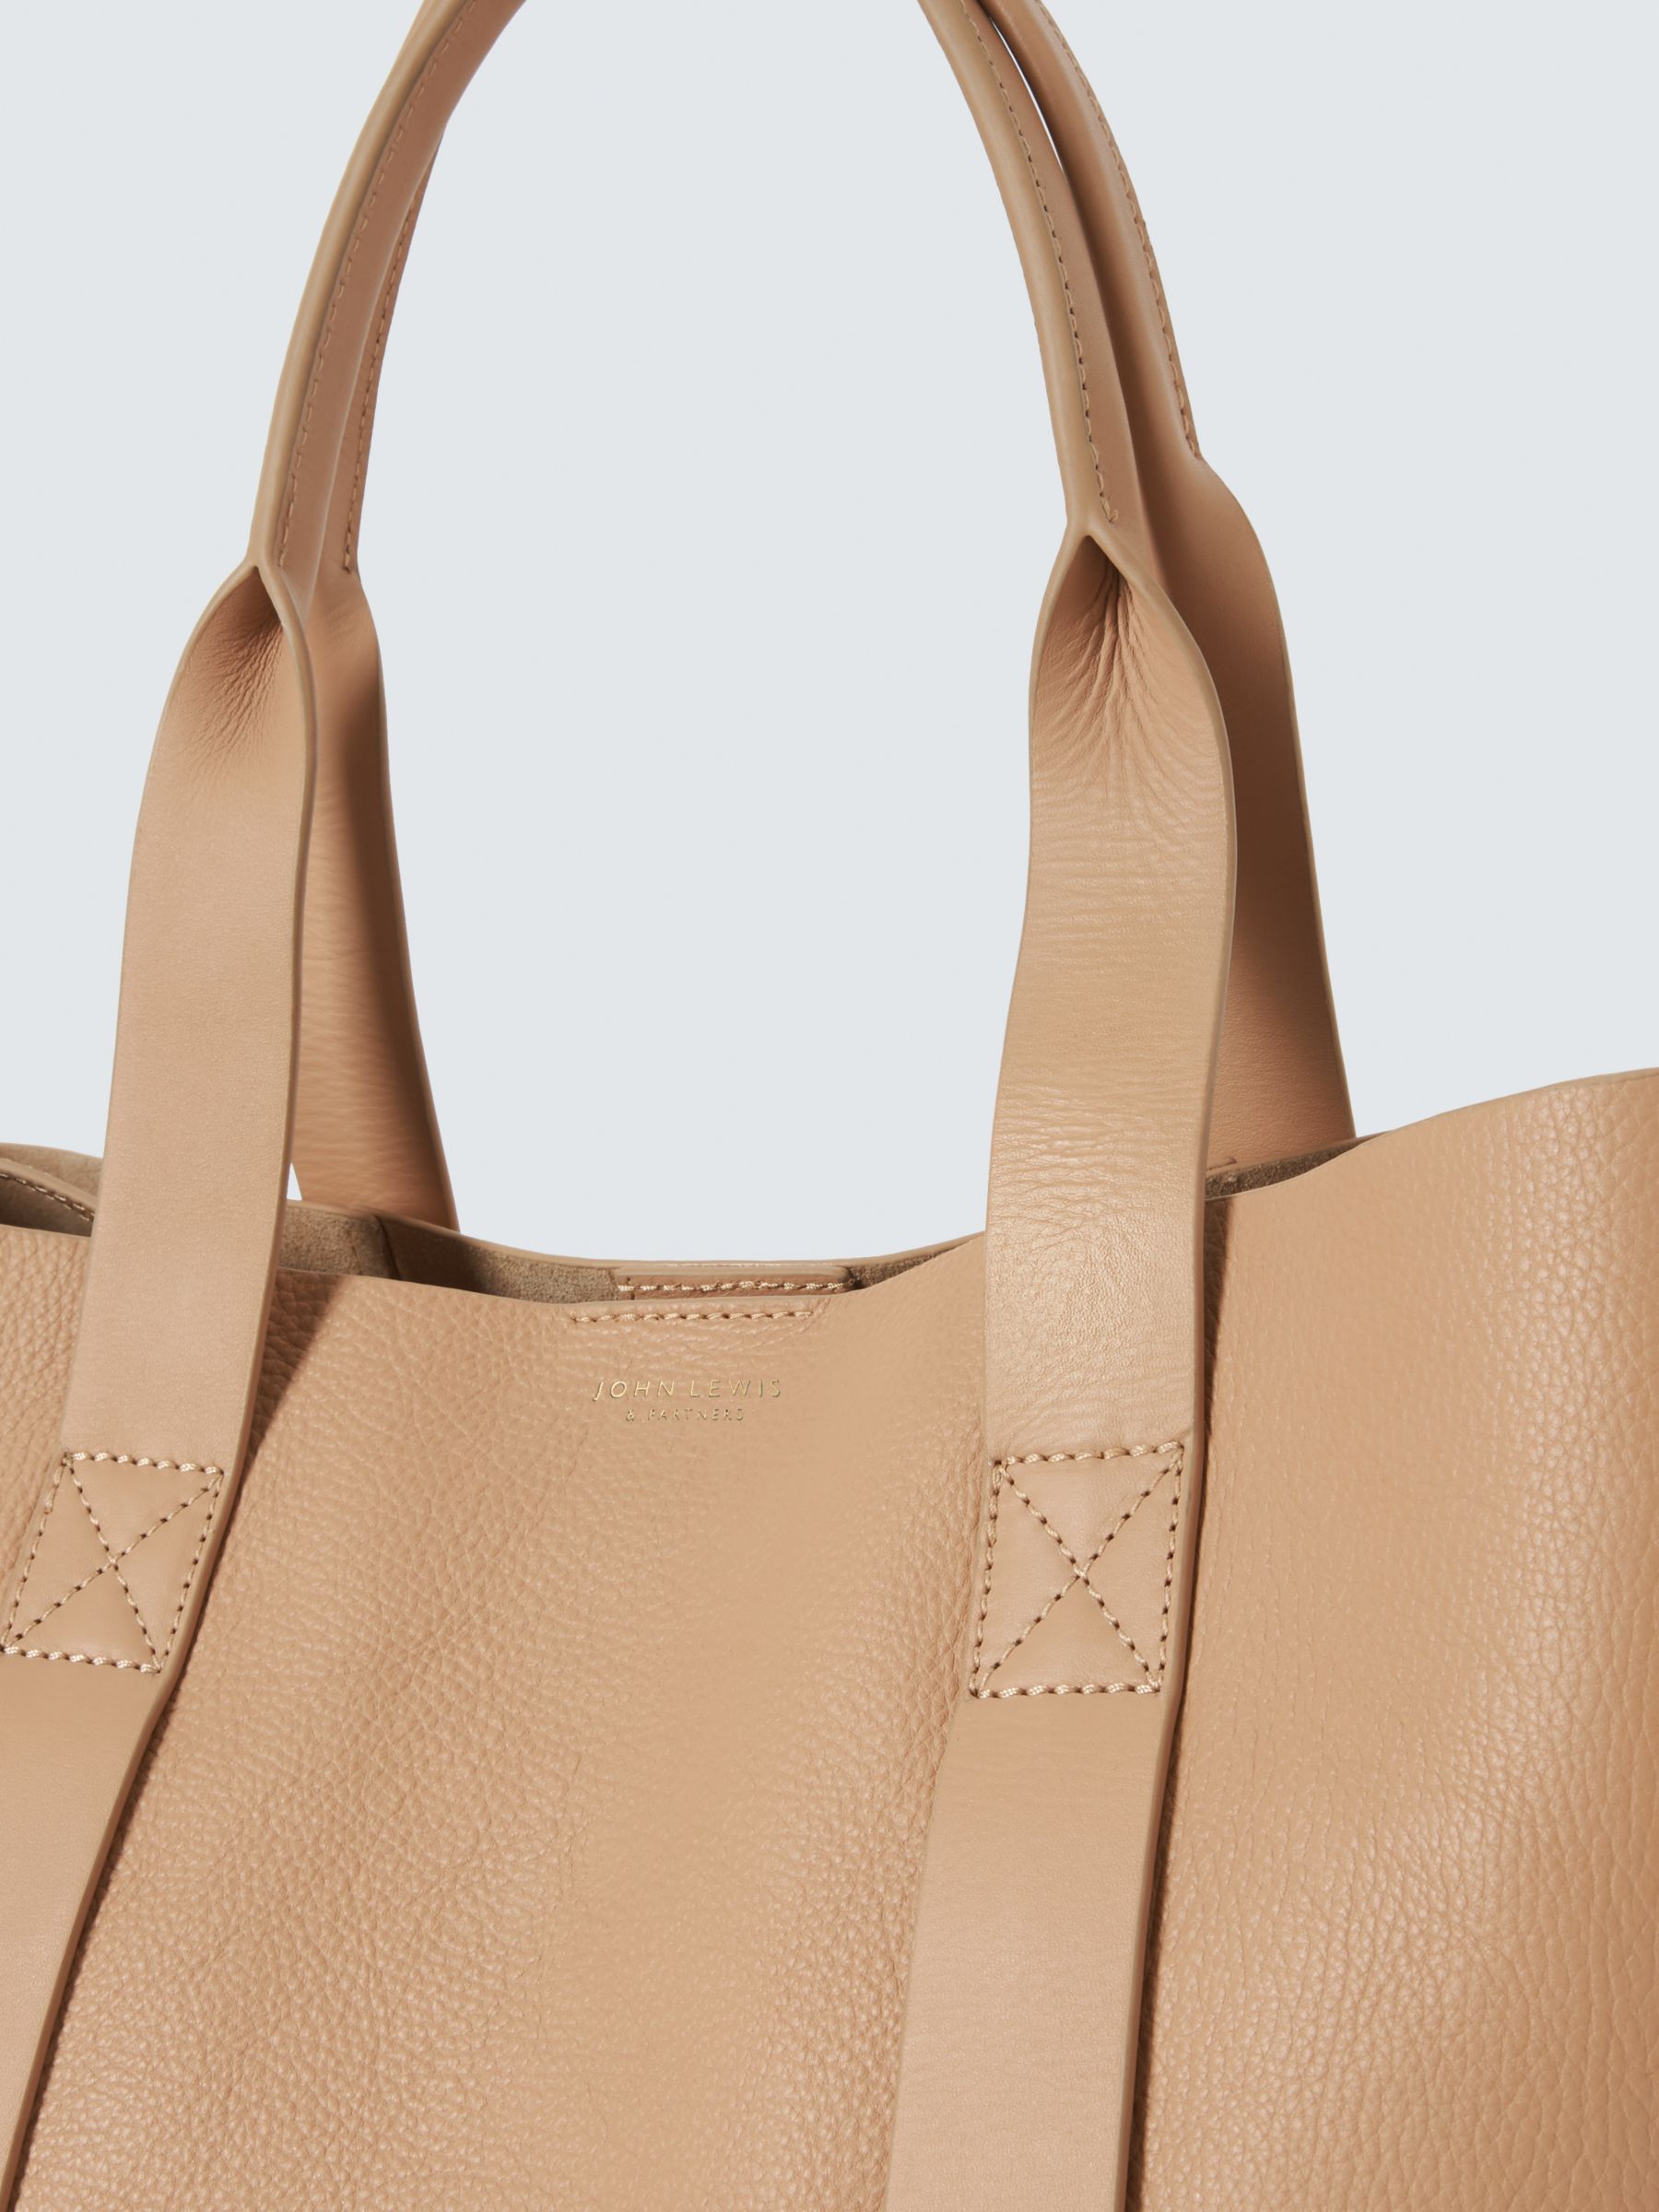 Buy John Lewis Luxe Leather Tote Bag Online at johnlewis.com